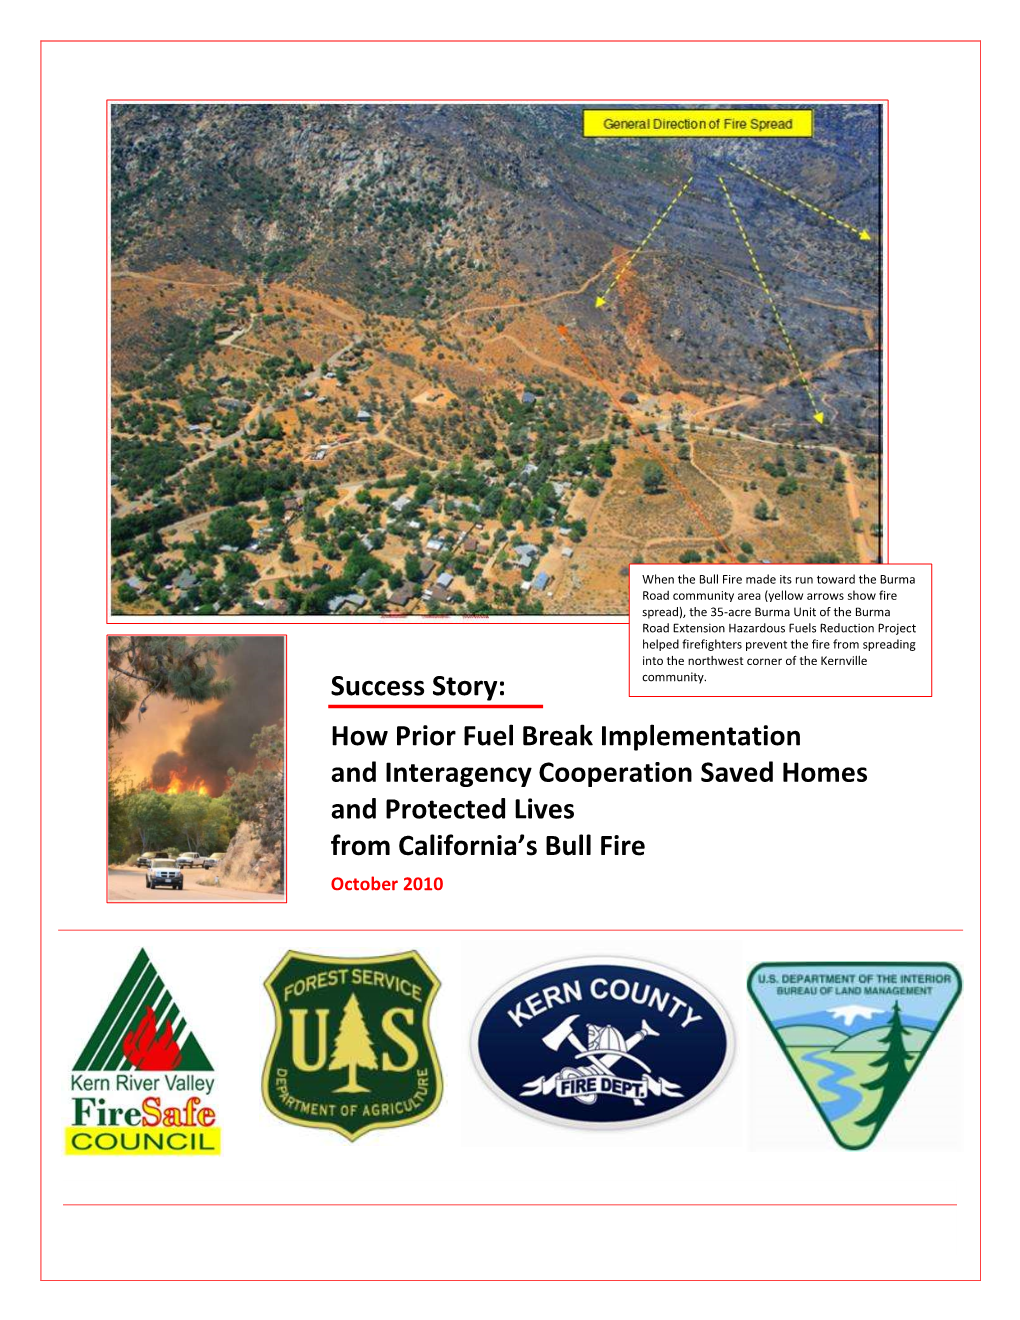 How Prior Fuel Break Implementation and Interagency Cooperation Saved Homes and Protected Lives from California’S Bull Fire